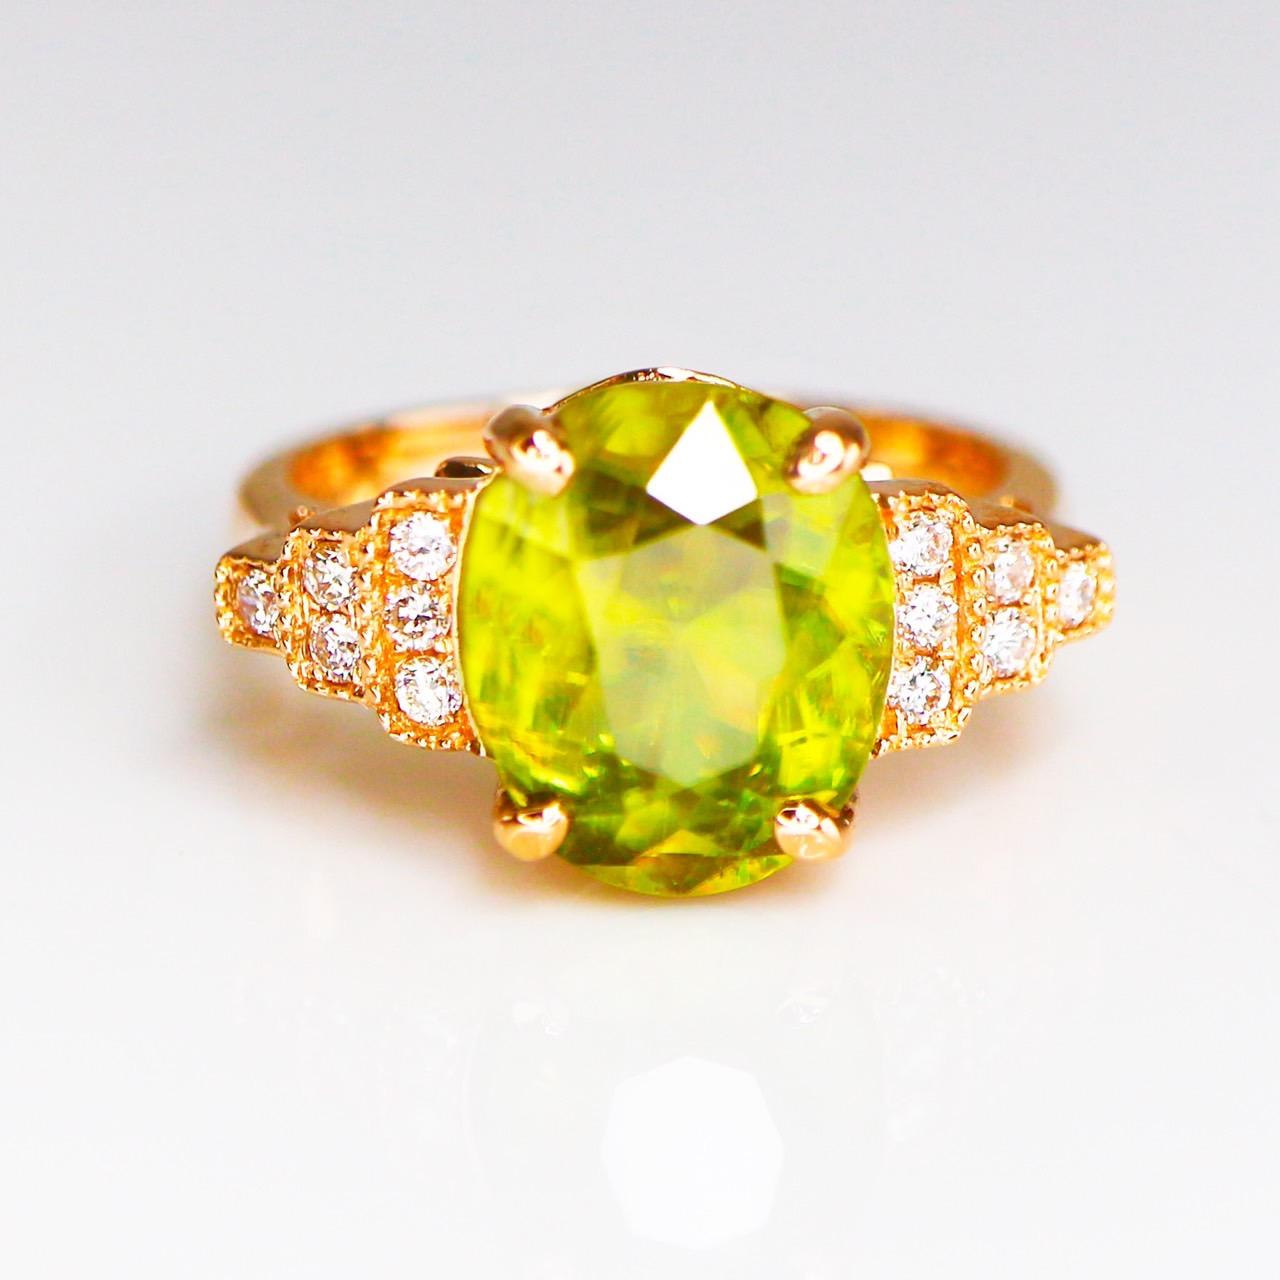 *IGI 14K 3.85 ct  Natural Color Play Sphene Diamonds Antique Engagement Ring*
This ring features a 3.85 carat natural intense yellow-green Sphene that is IGI-Certified, with a color-play effect. It is set on a 14K rose gold band and accented with FG